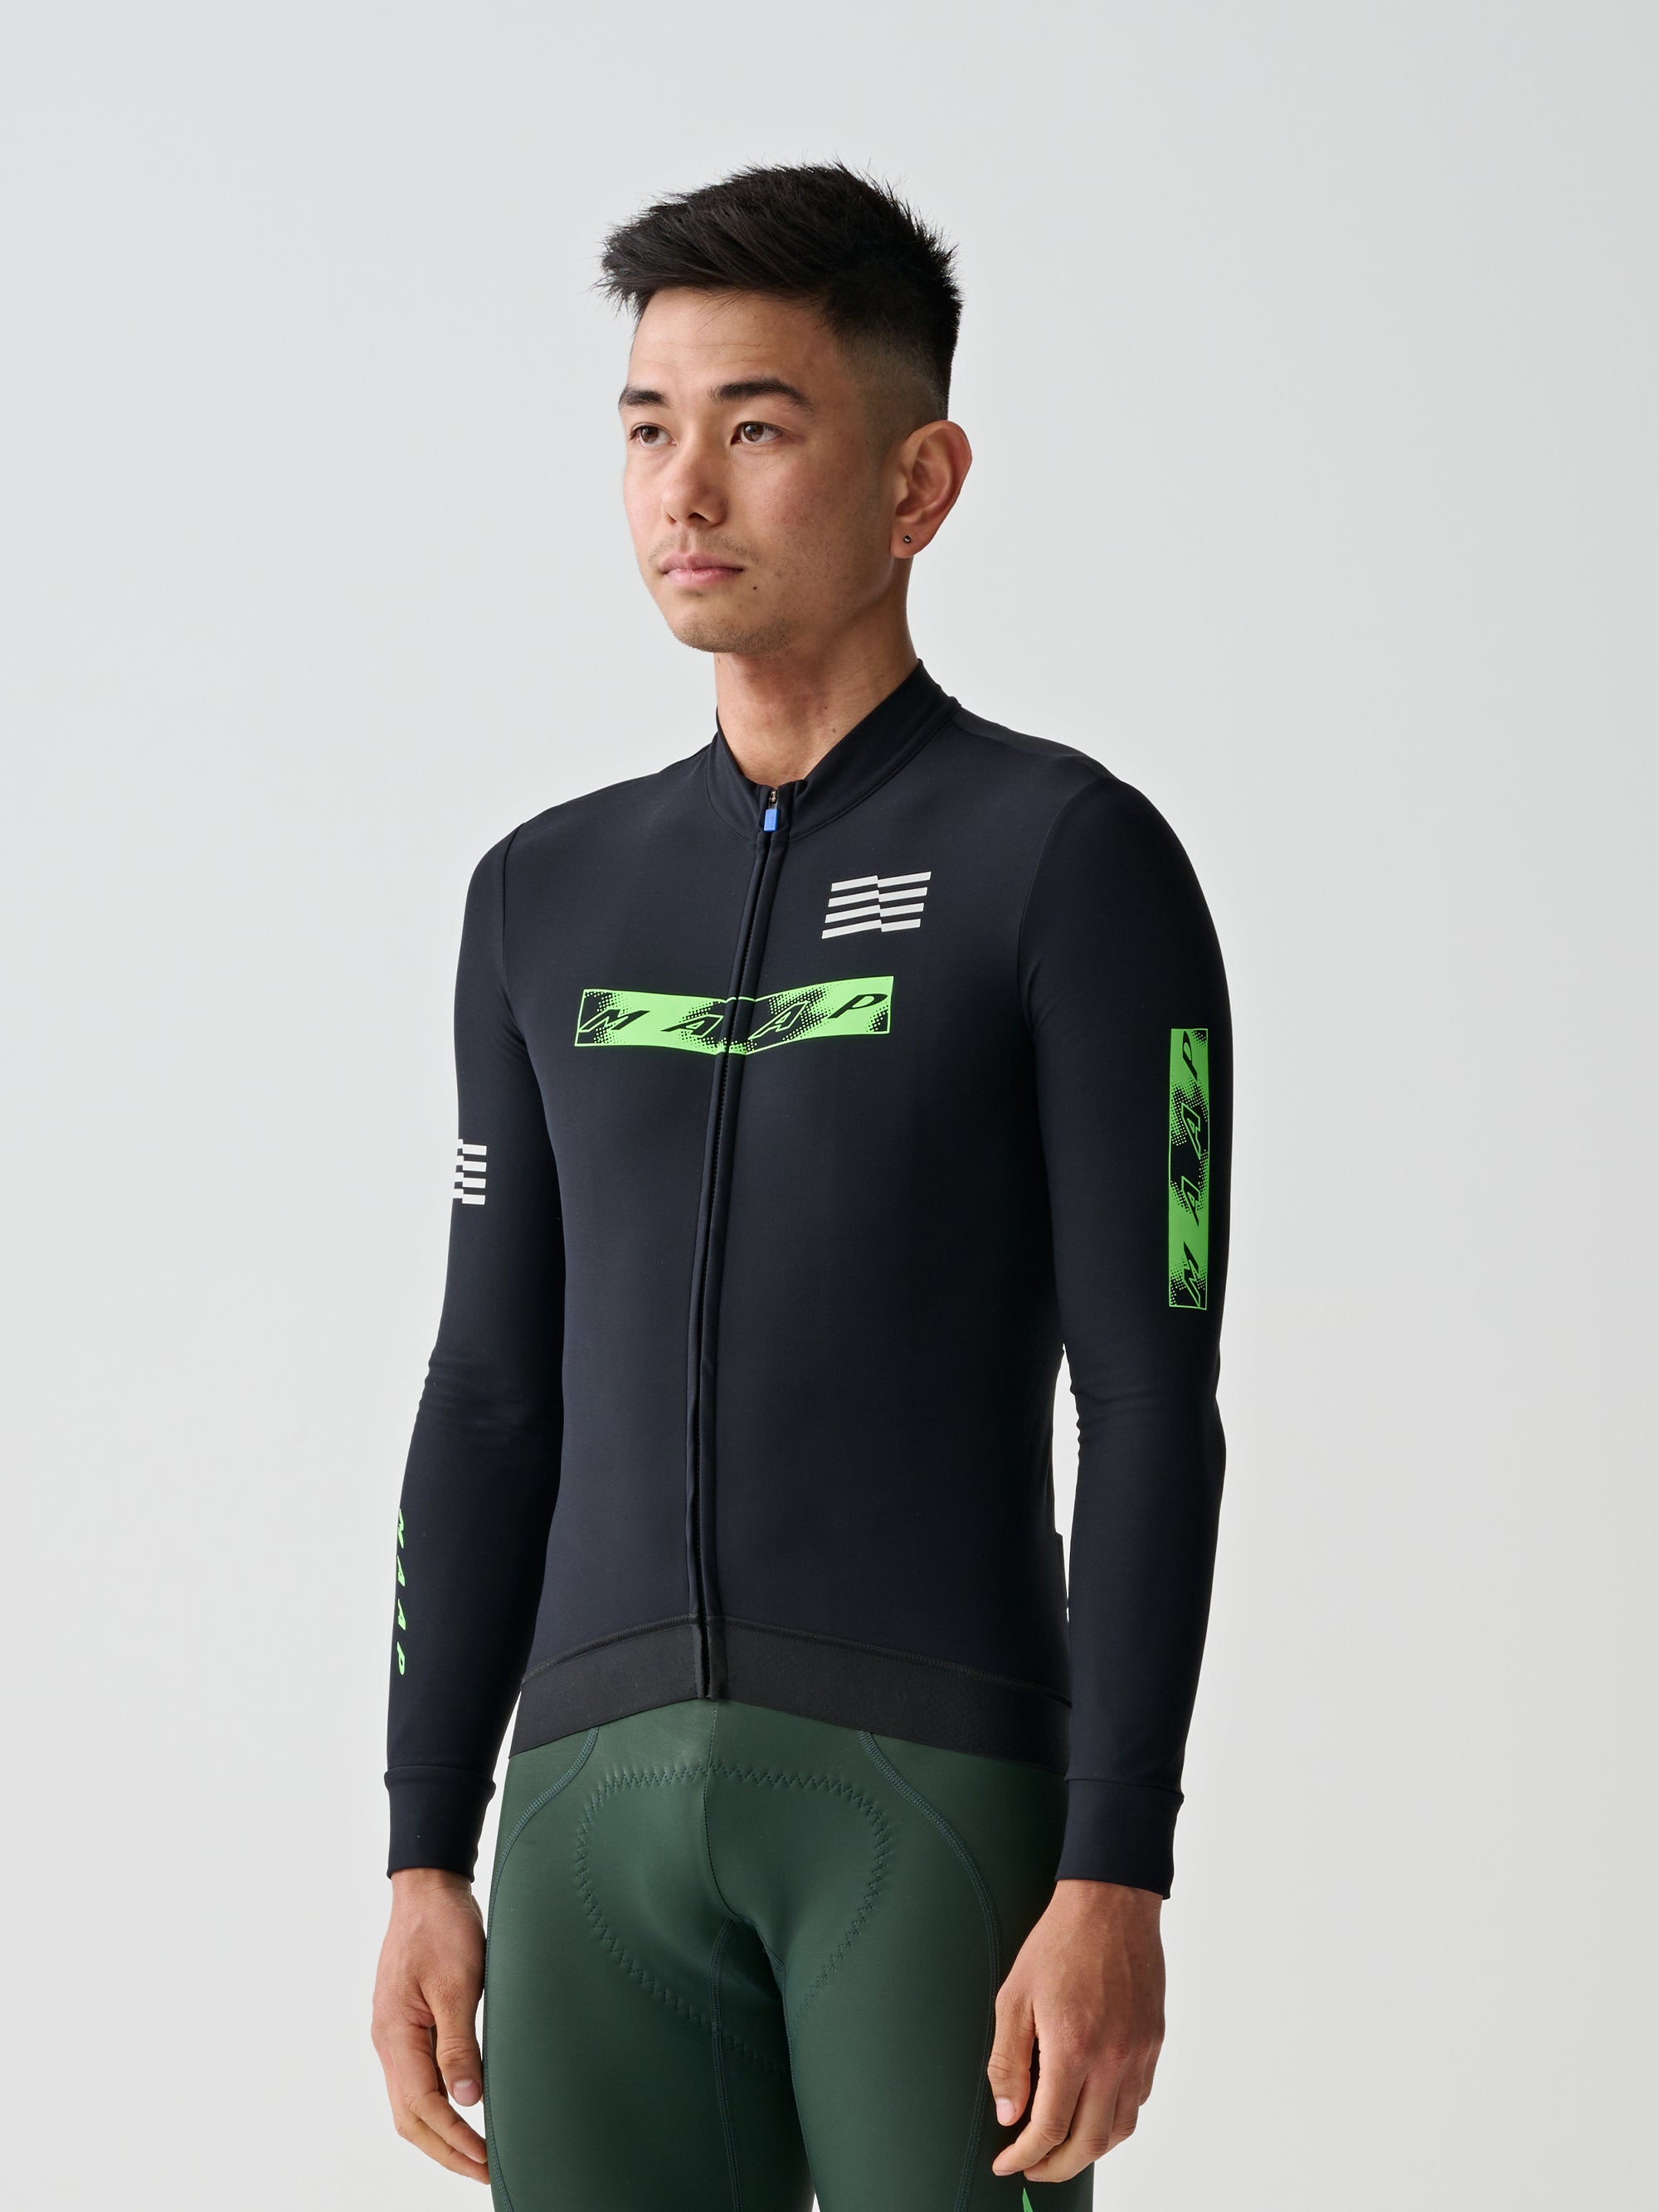 LPW Thermal LS Jersey - MAAP Cycling Apparel